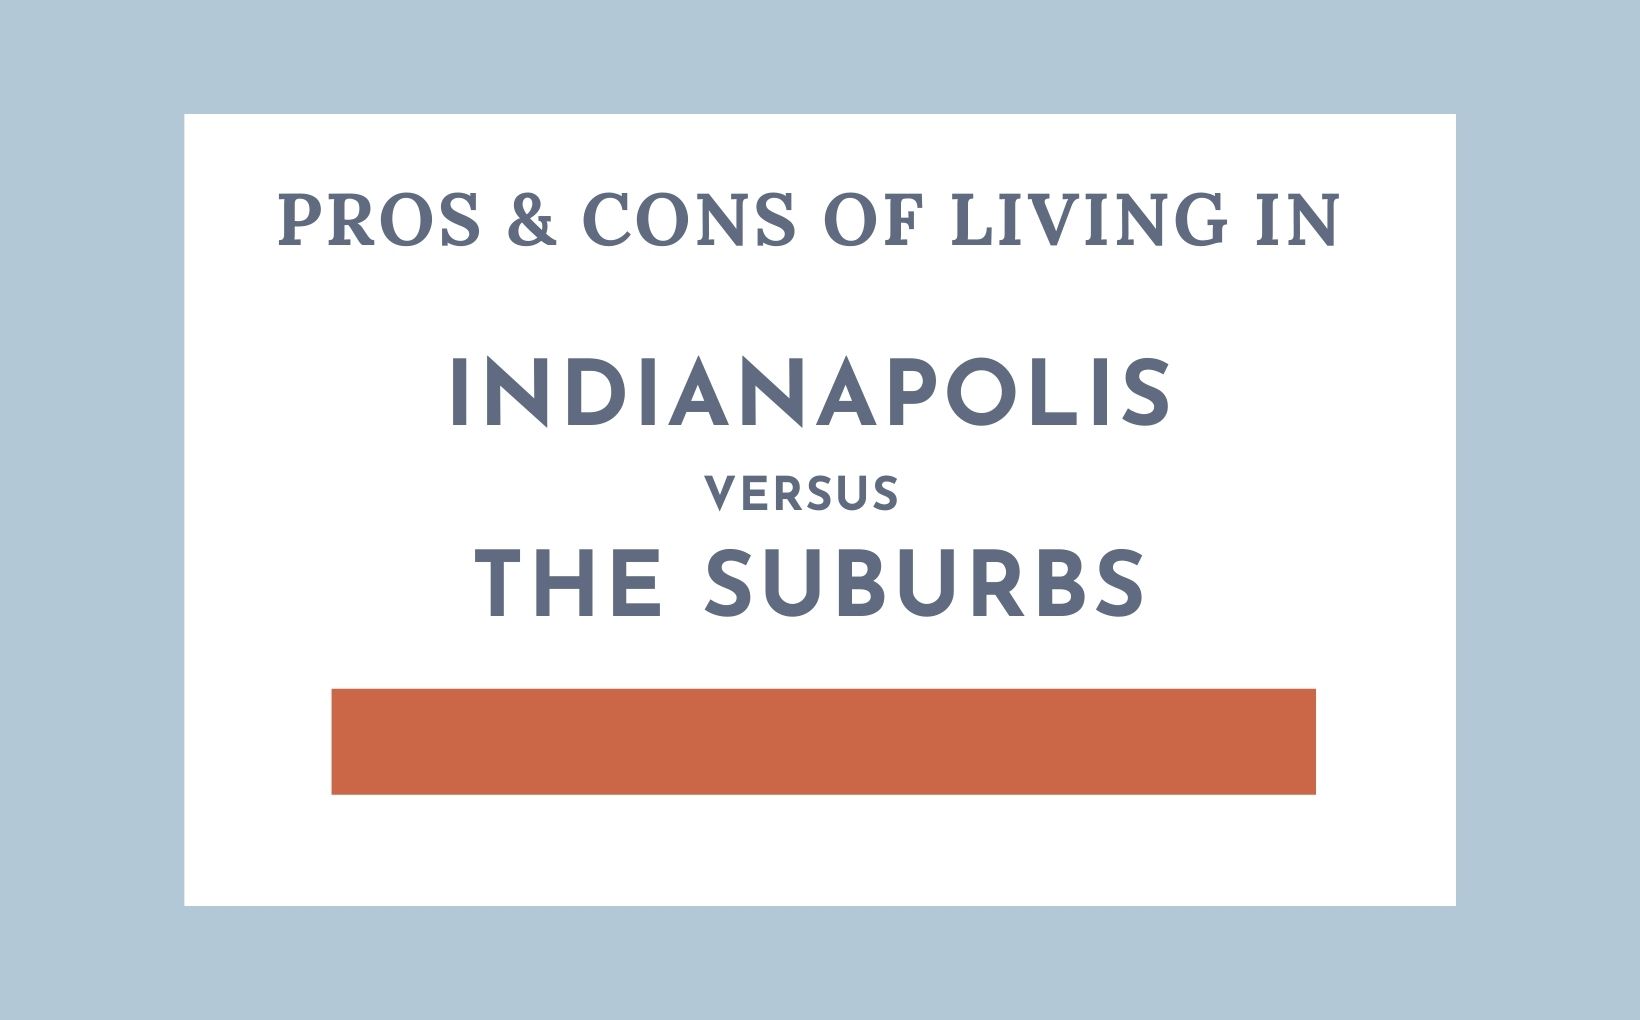 Pros & cons of living in Indianapolis versus the suburbs feature img